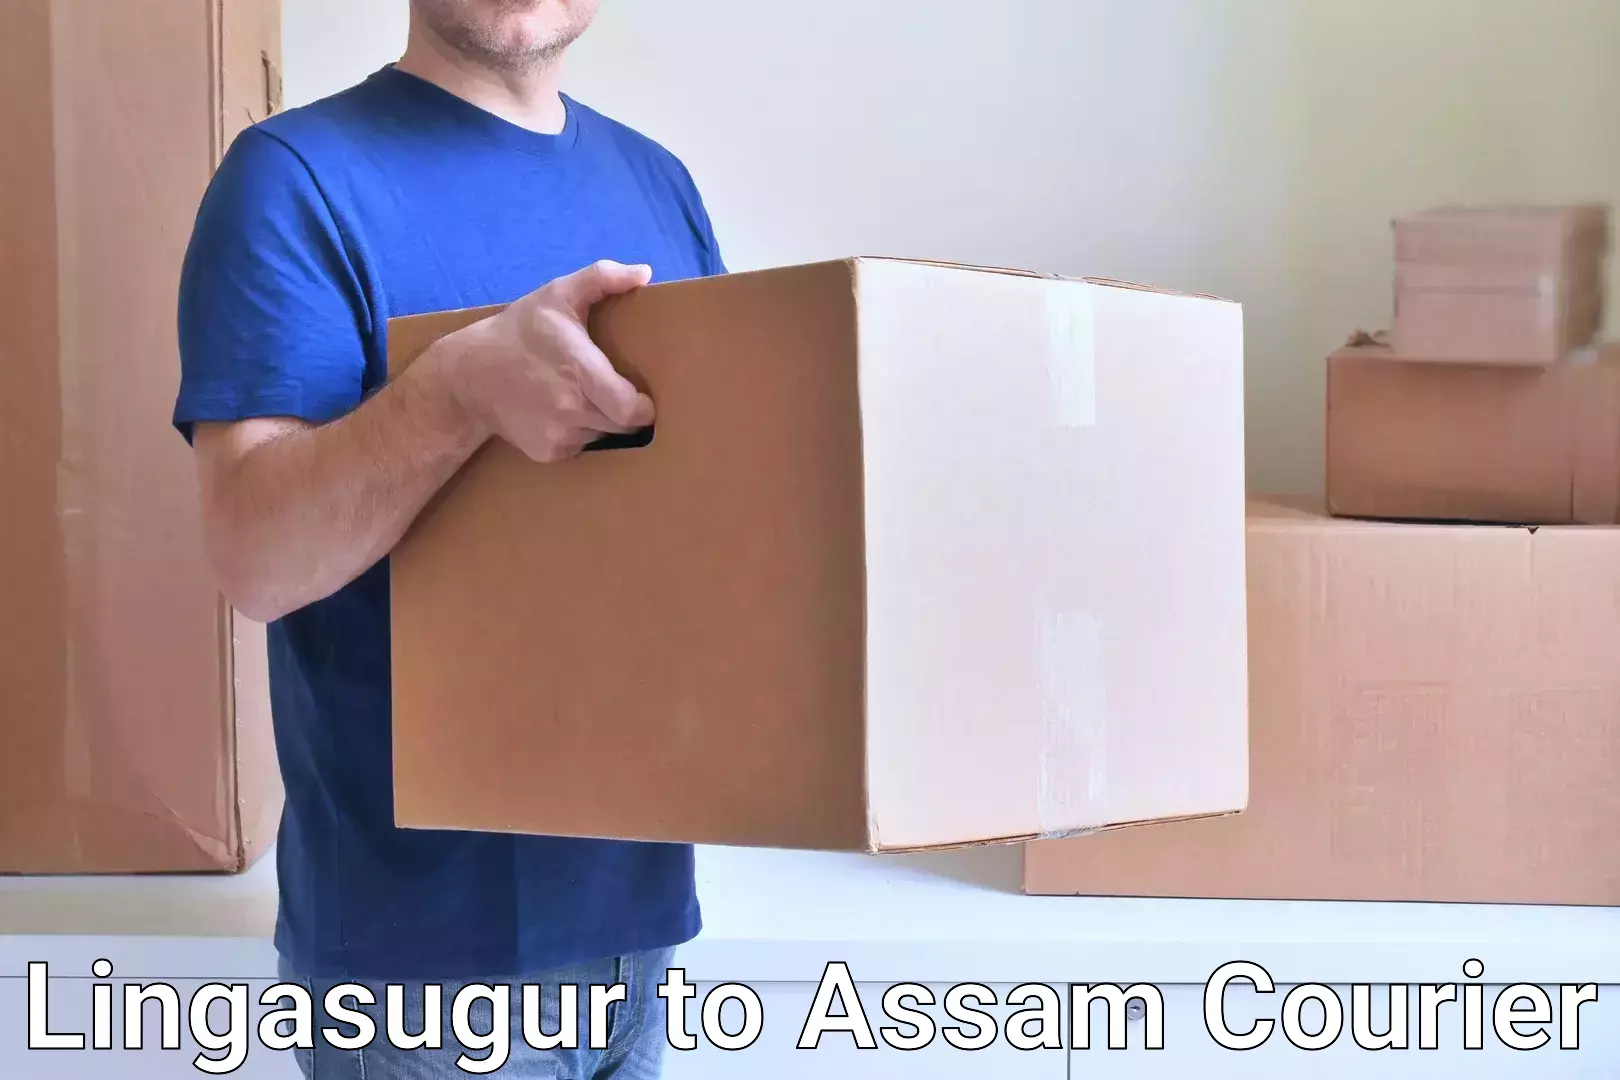 Supply chain delivery Lingasugur to Lala Assam